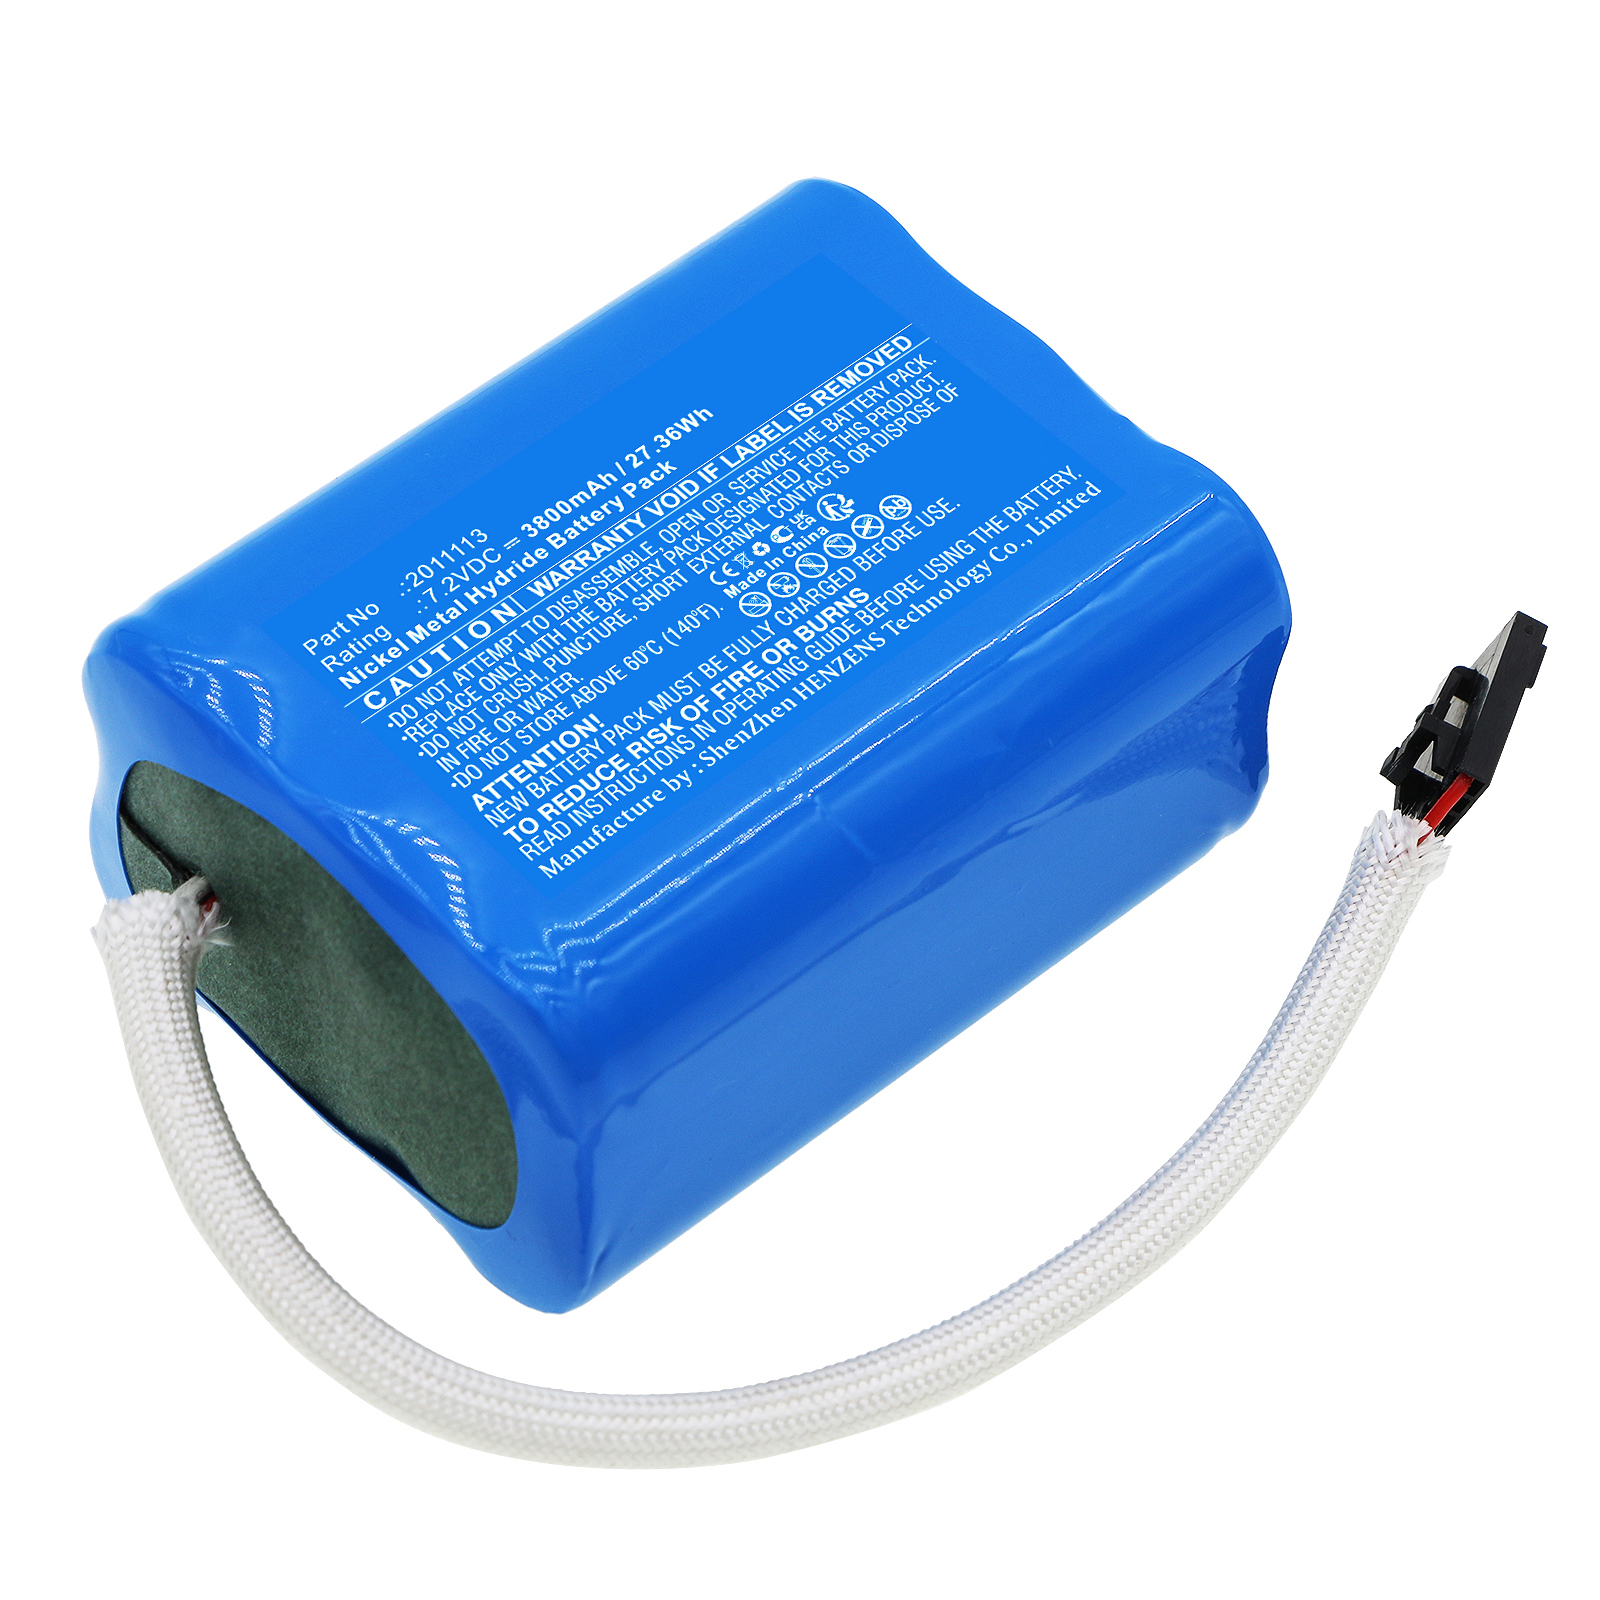 Synergy Digital Equipment Battery, Compatible with QED 2011113 Equipment Battery (Ni-MH, 7.2V, 3800mAh)